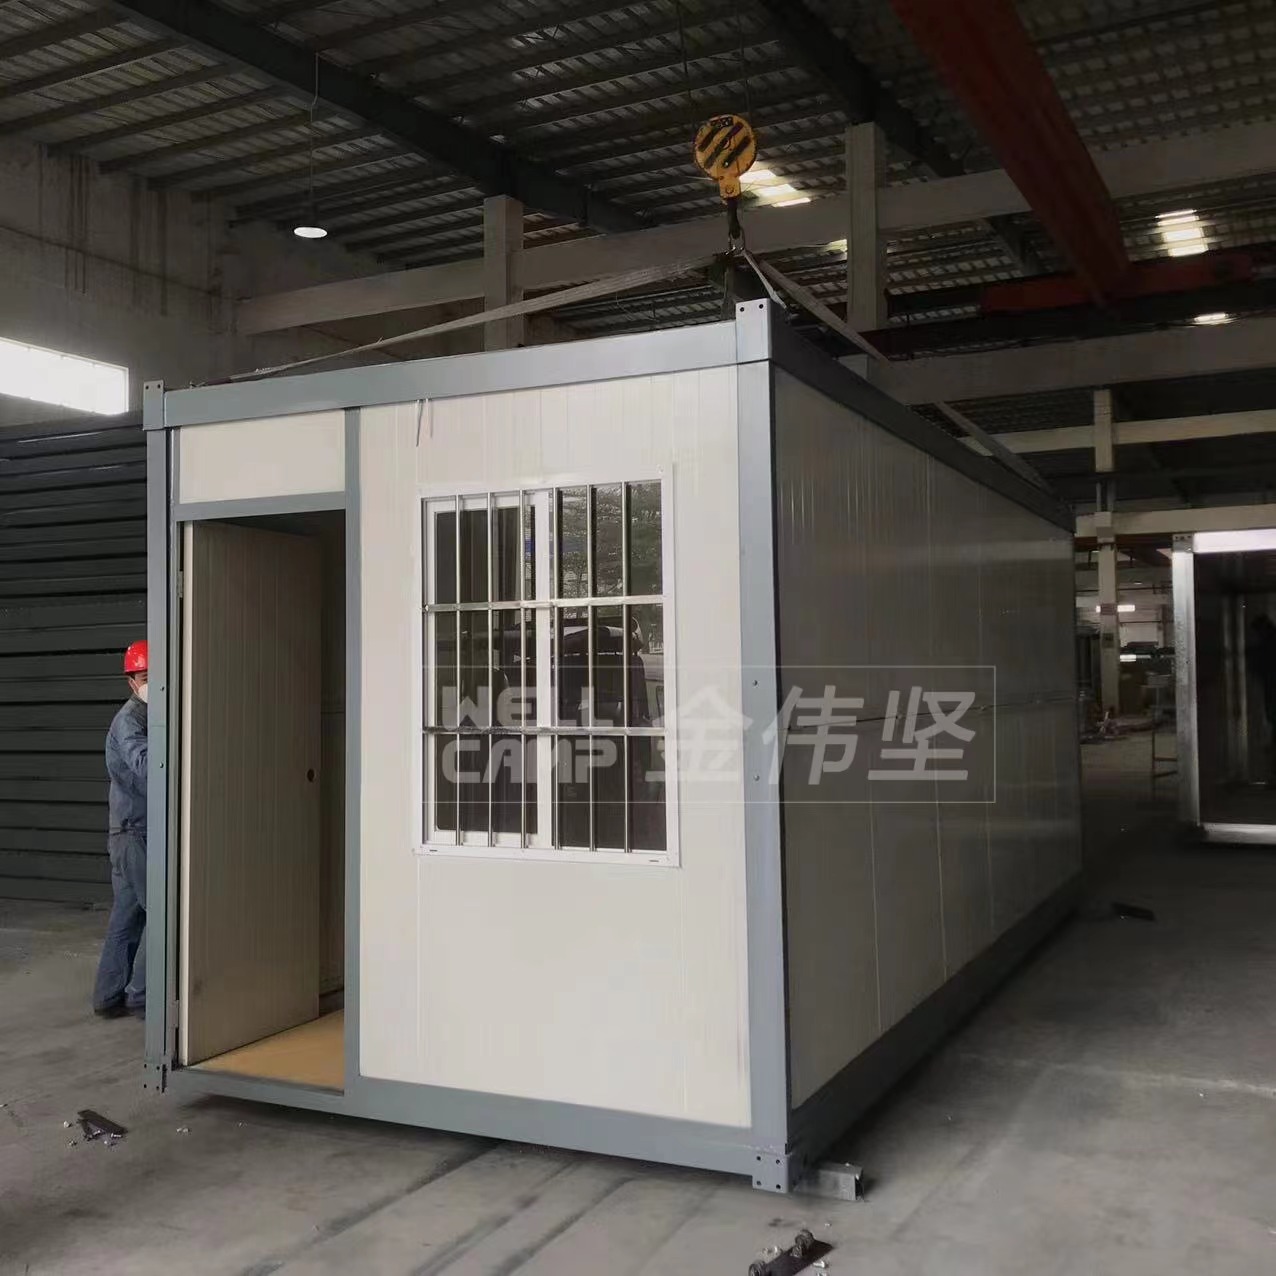 product-WELLCAMP, WELLCAMP prefab house, WELLCAMP container house-2022 newest labor camp foldable ex-1